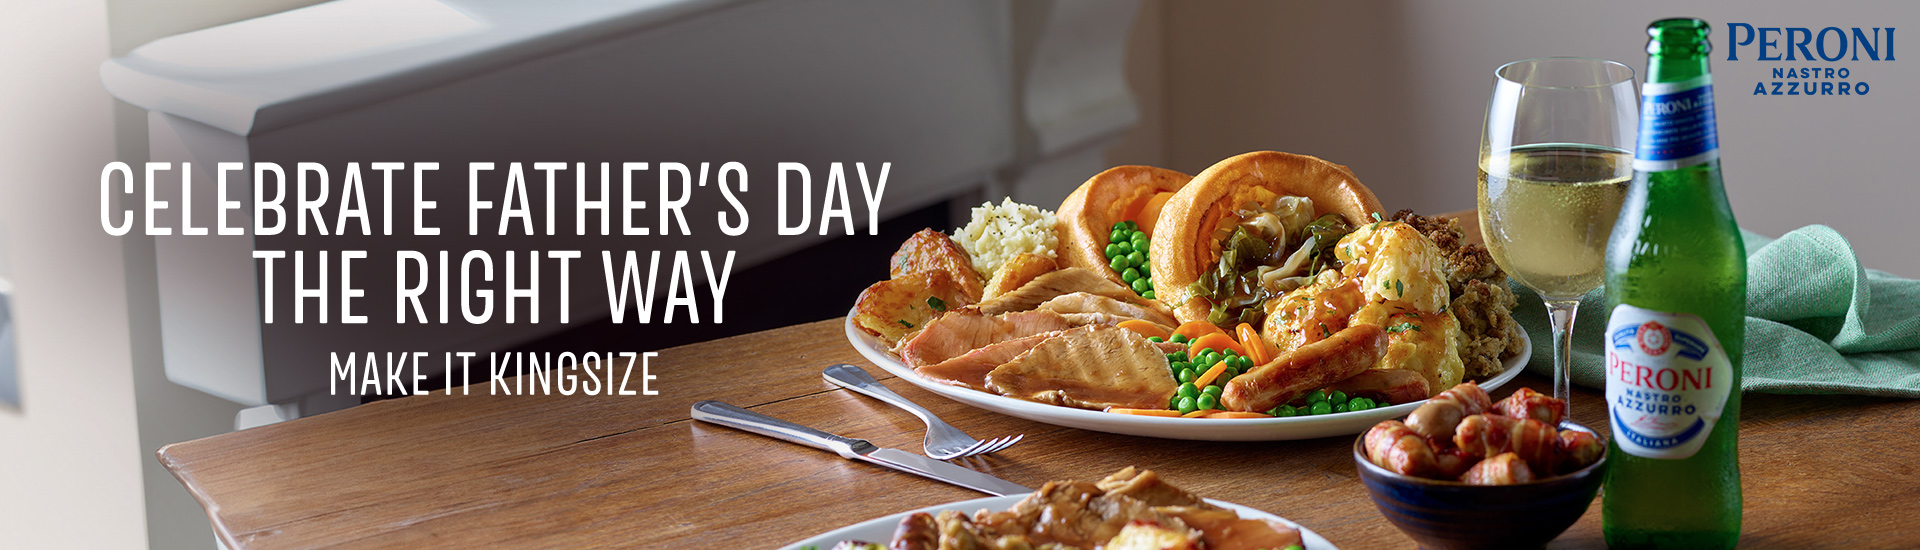 Father’s day carvery in Bolton